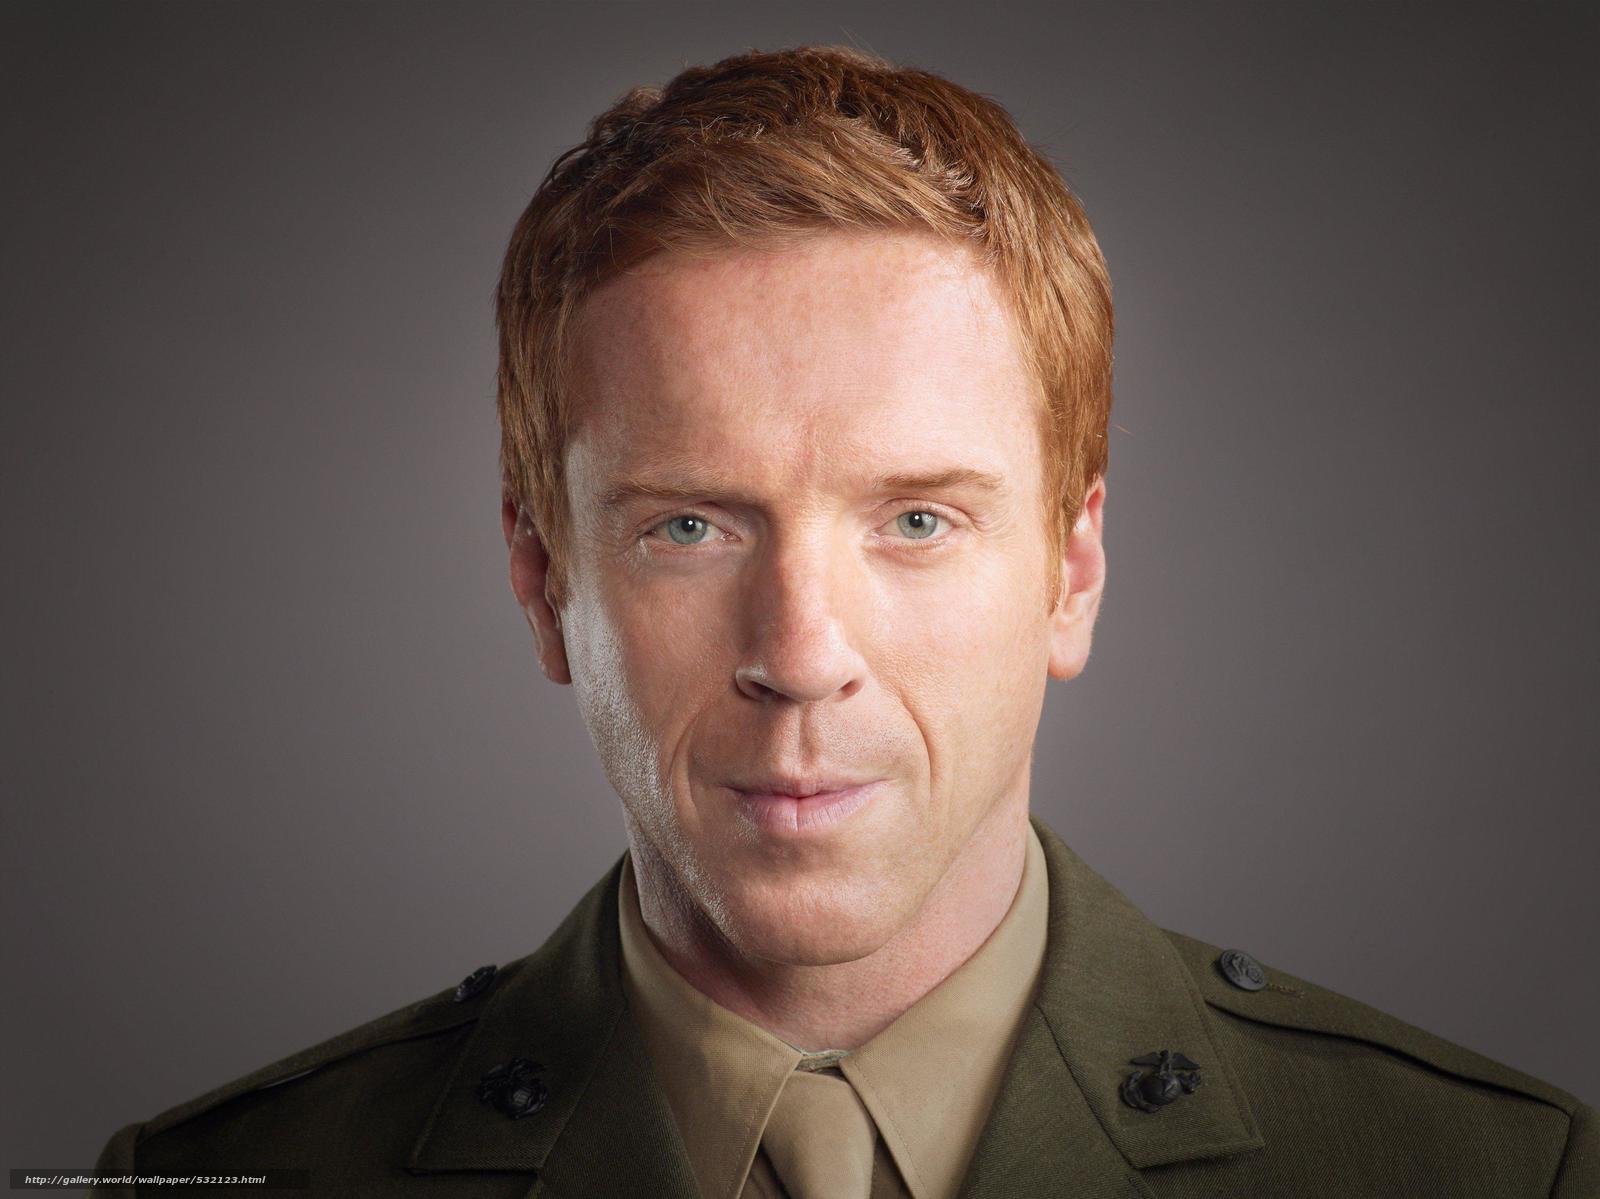 Download wallpaper Damian Lewis, Nicholas Brody, form, odd man out free desktop wallpaper in the resolution 3000x2248